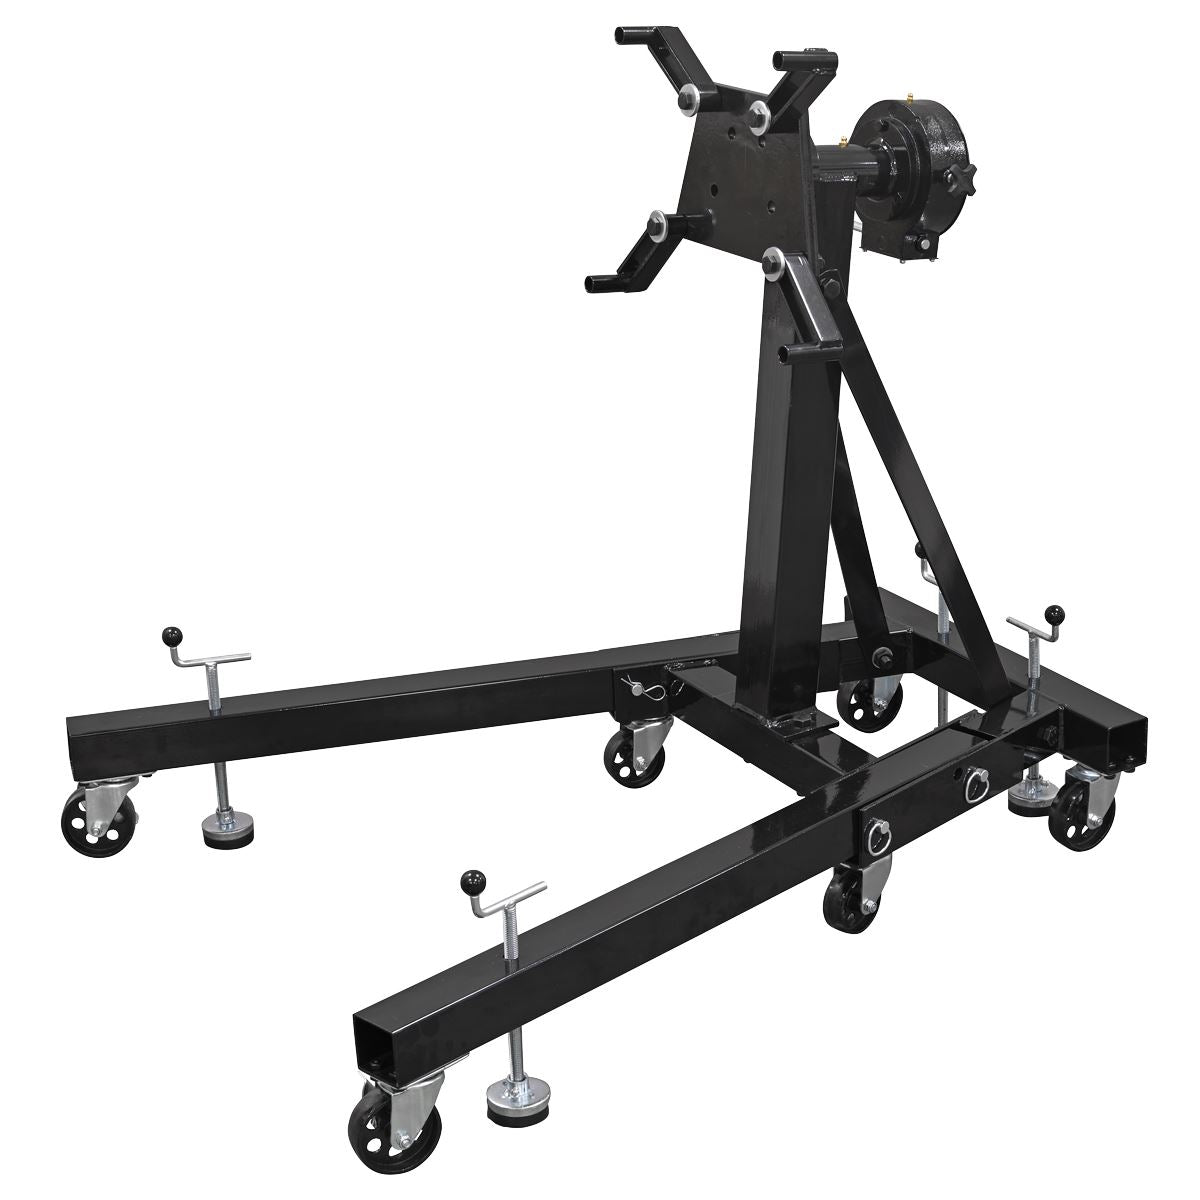 Sealey Folding 360º Rotating Engine Stand with Geared Handle Drive 680kg Capacity